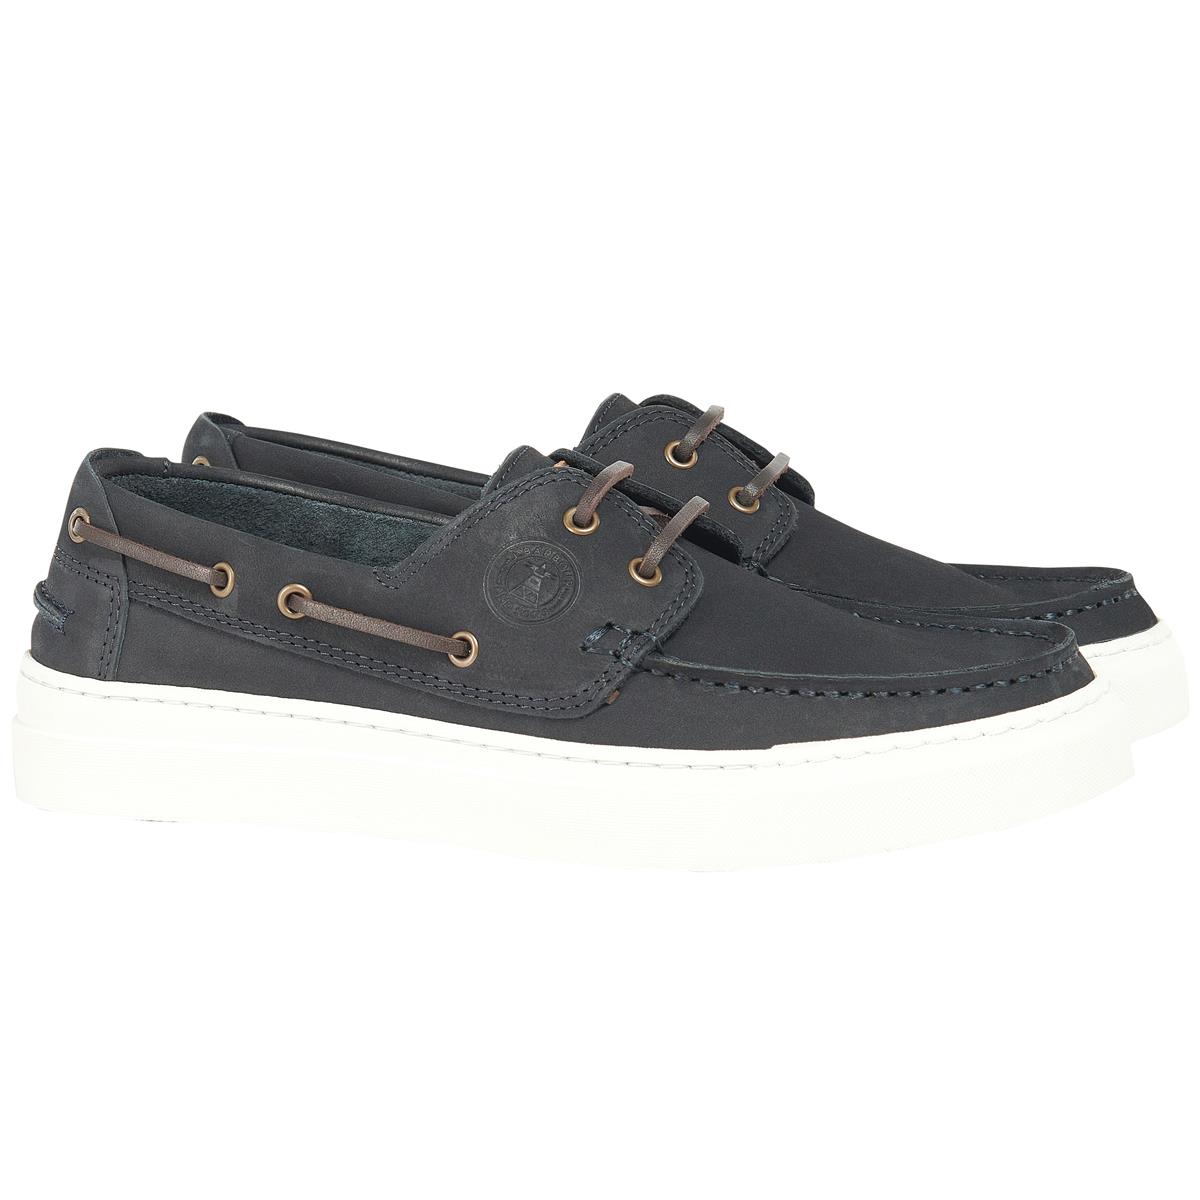 Barbour Mens Bosun Boat Shoes Questions & Answers